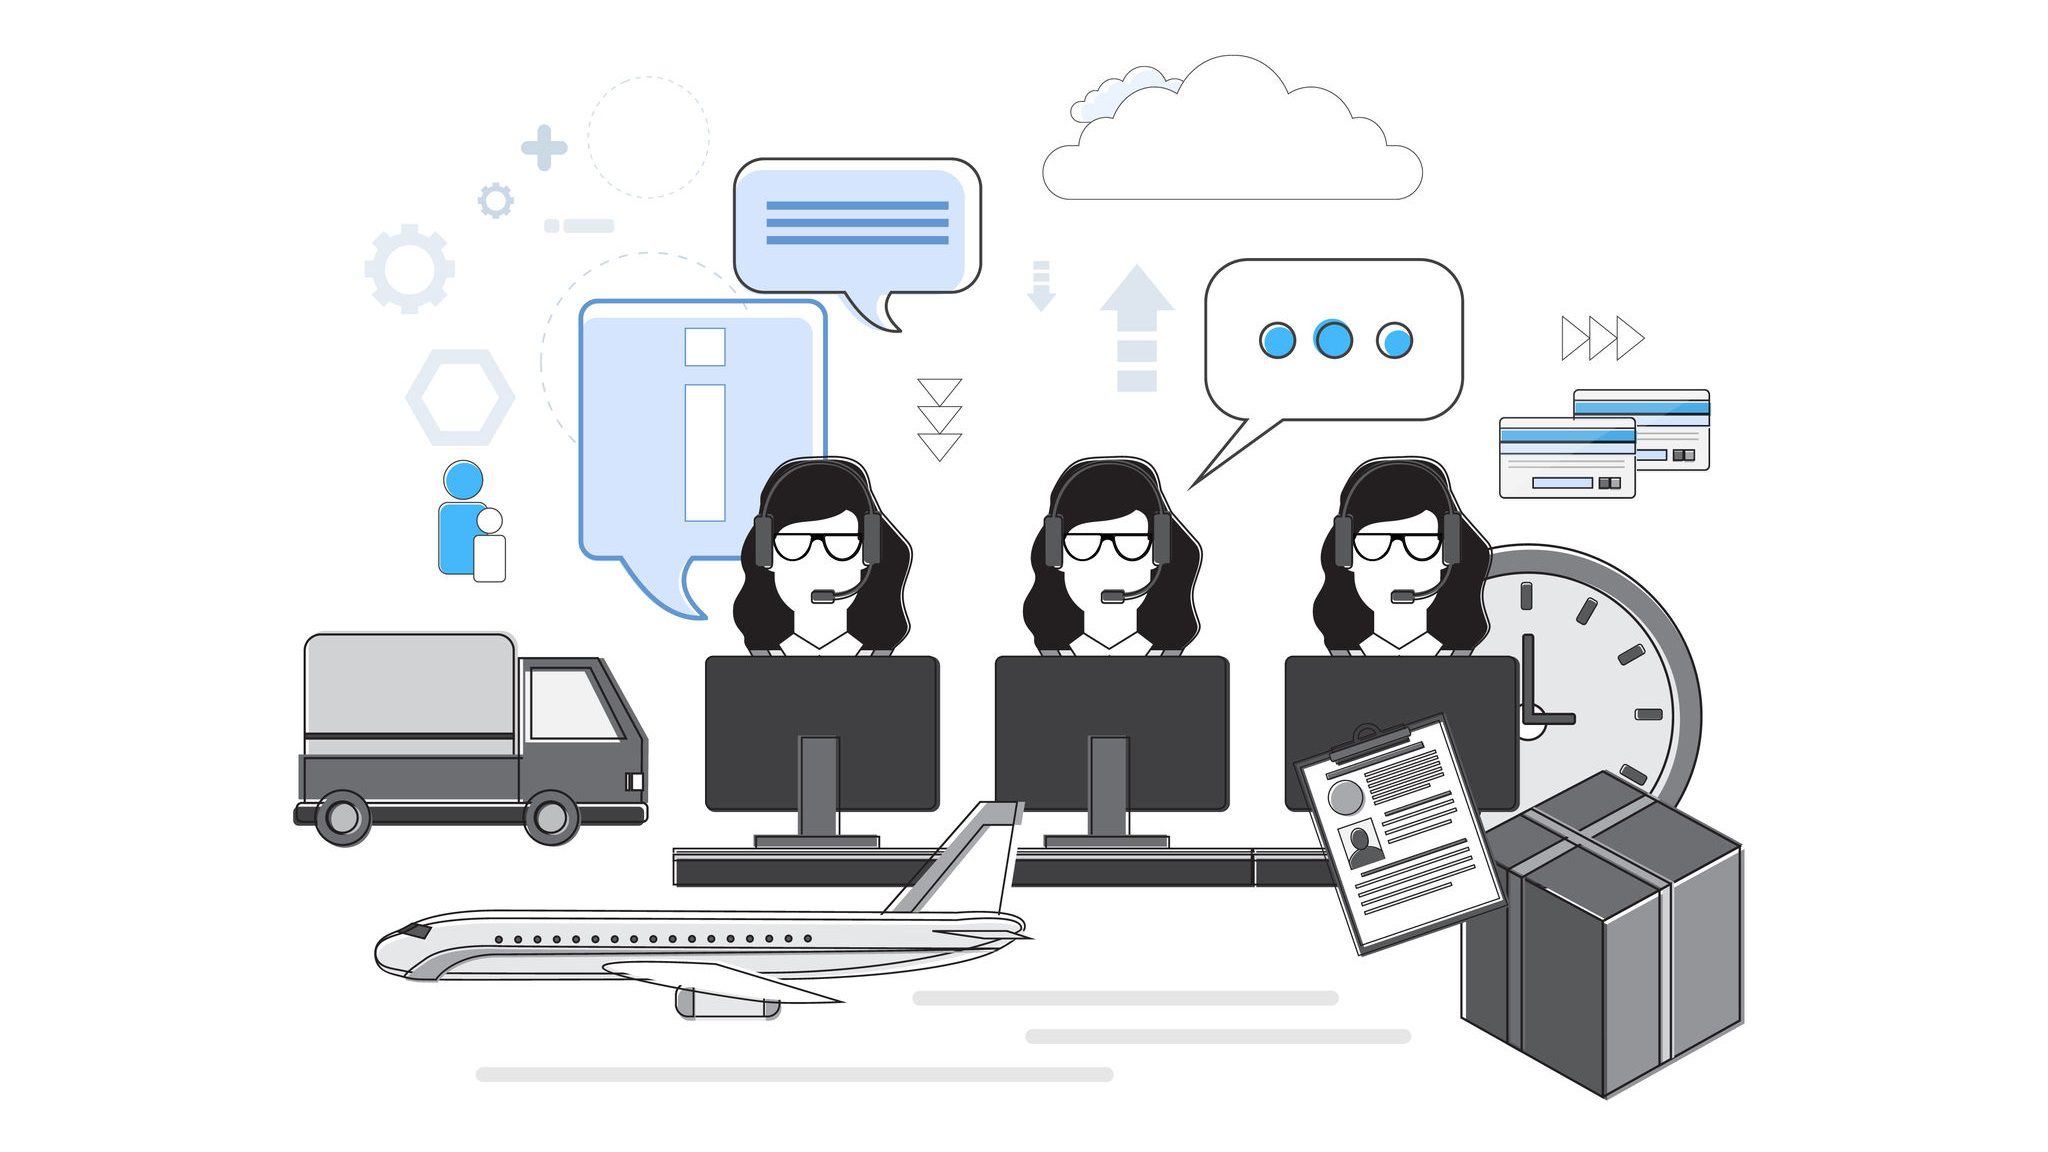 Three women at computers with headsets on surrounded by icons representing different things they may help with as virtual assistants. Around them is a truck, an airplane, a package, an applicant resume, speech bubbles, and credit cards.